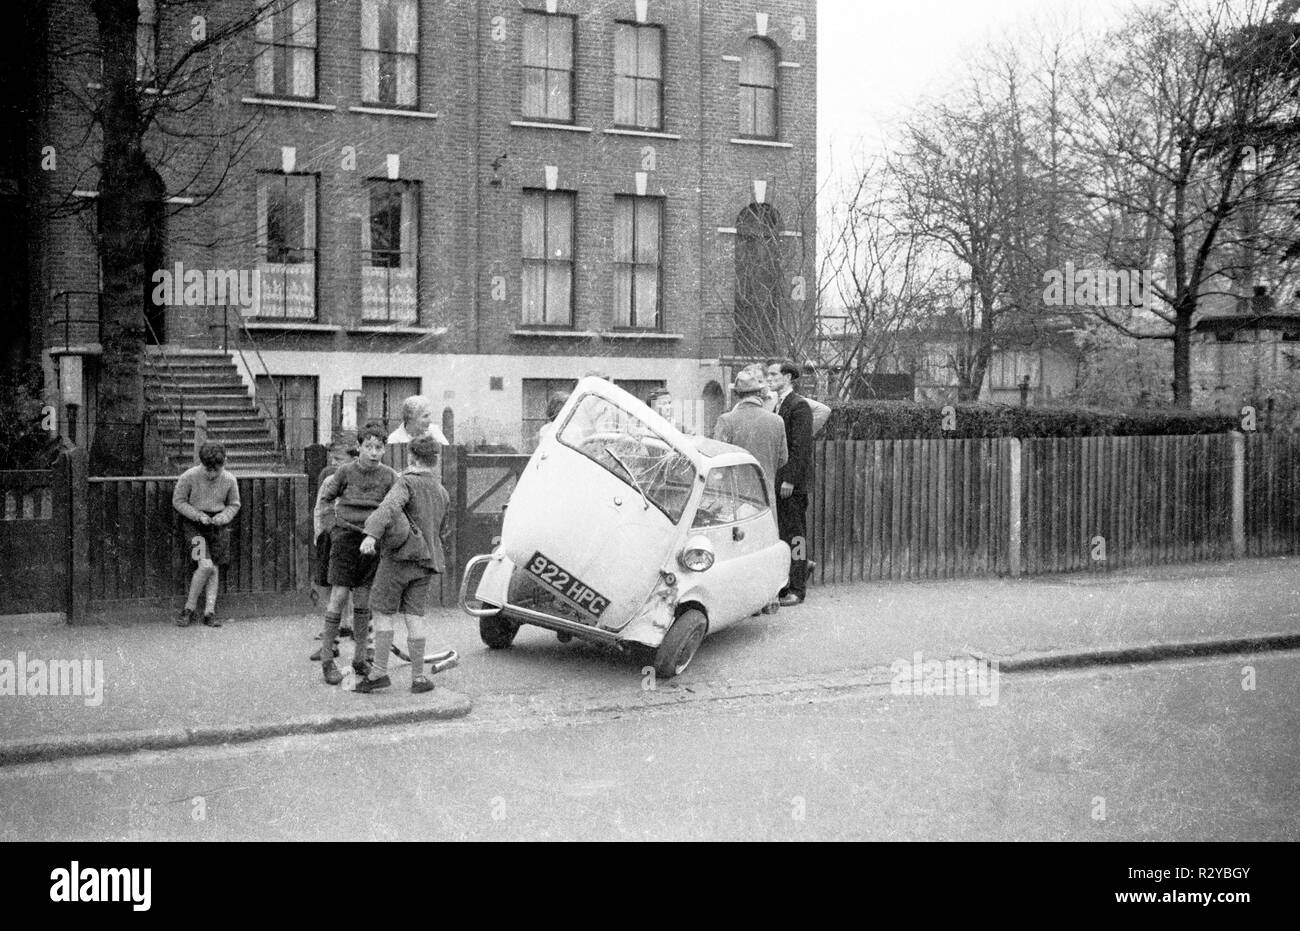 BMW Isetta bubble car damaged in accident in 1959 with onlookers and an estate of prefabs in background built where a flying bomb landed in WW2. Lee Green SE3. There is a colourised version R2YBK5. Stock Photo